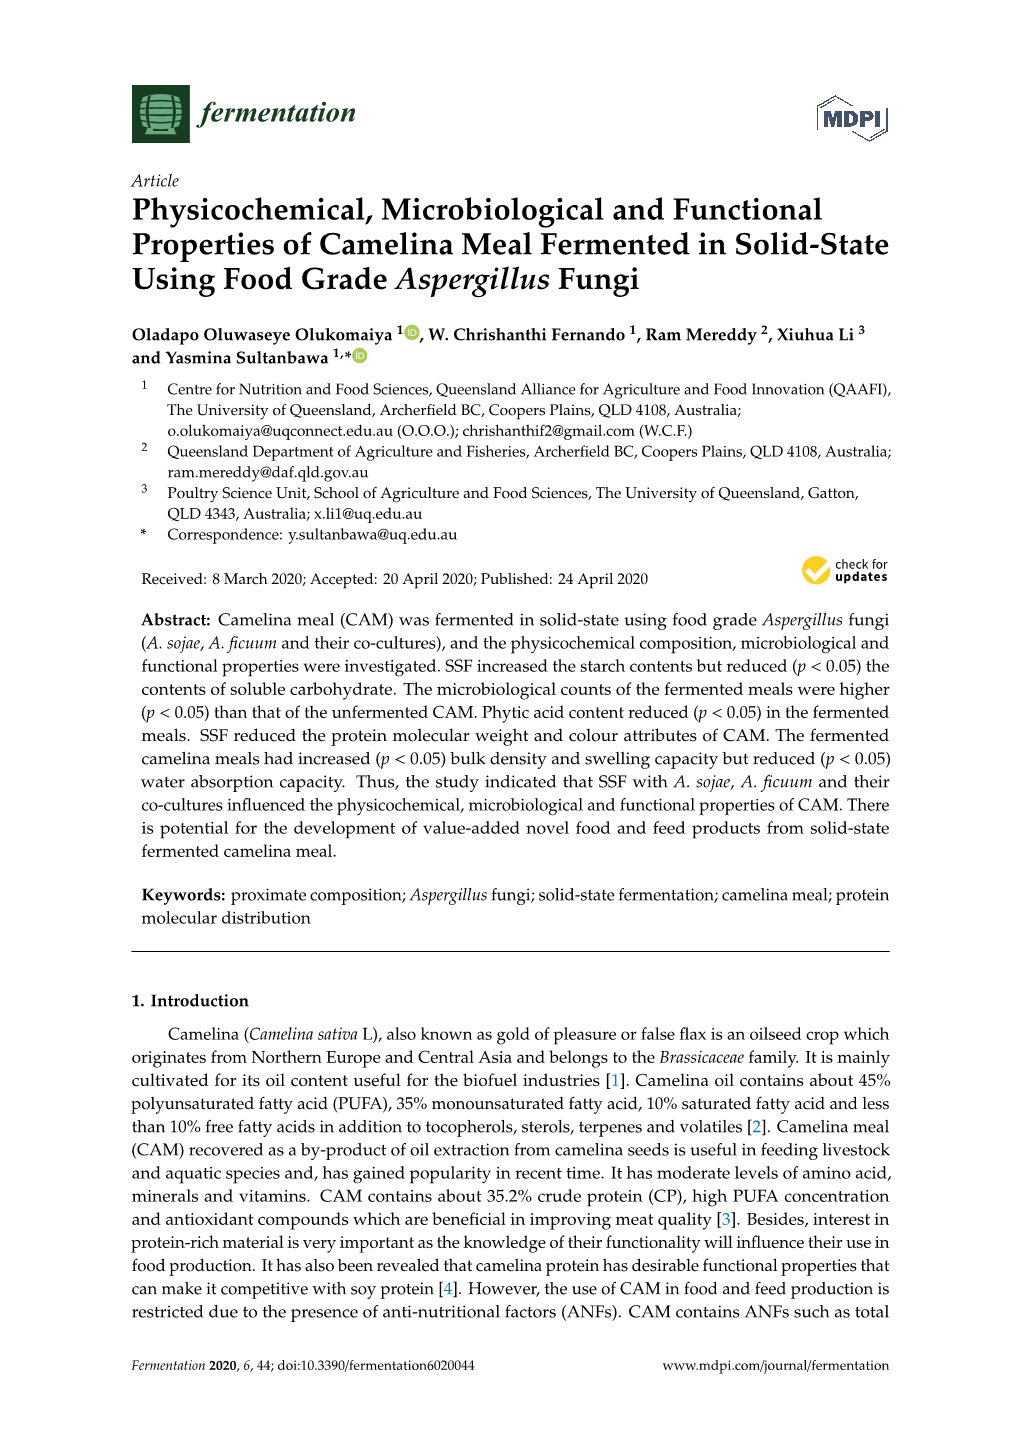 Physicochemical, Microbiological and Functional Properties of Camelina Meal Fermented in Solid-State Using Food Grade Aspergillus Fungi